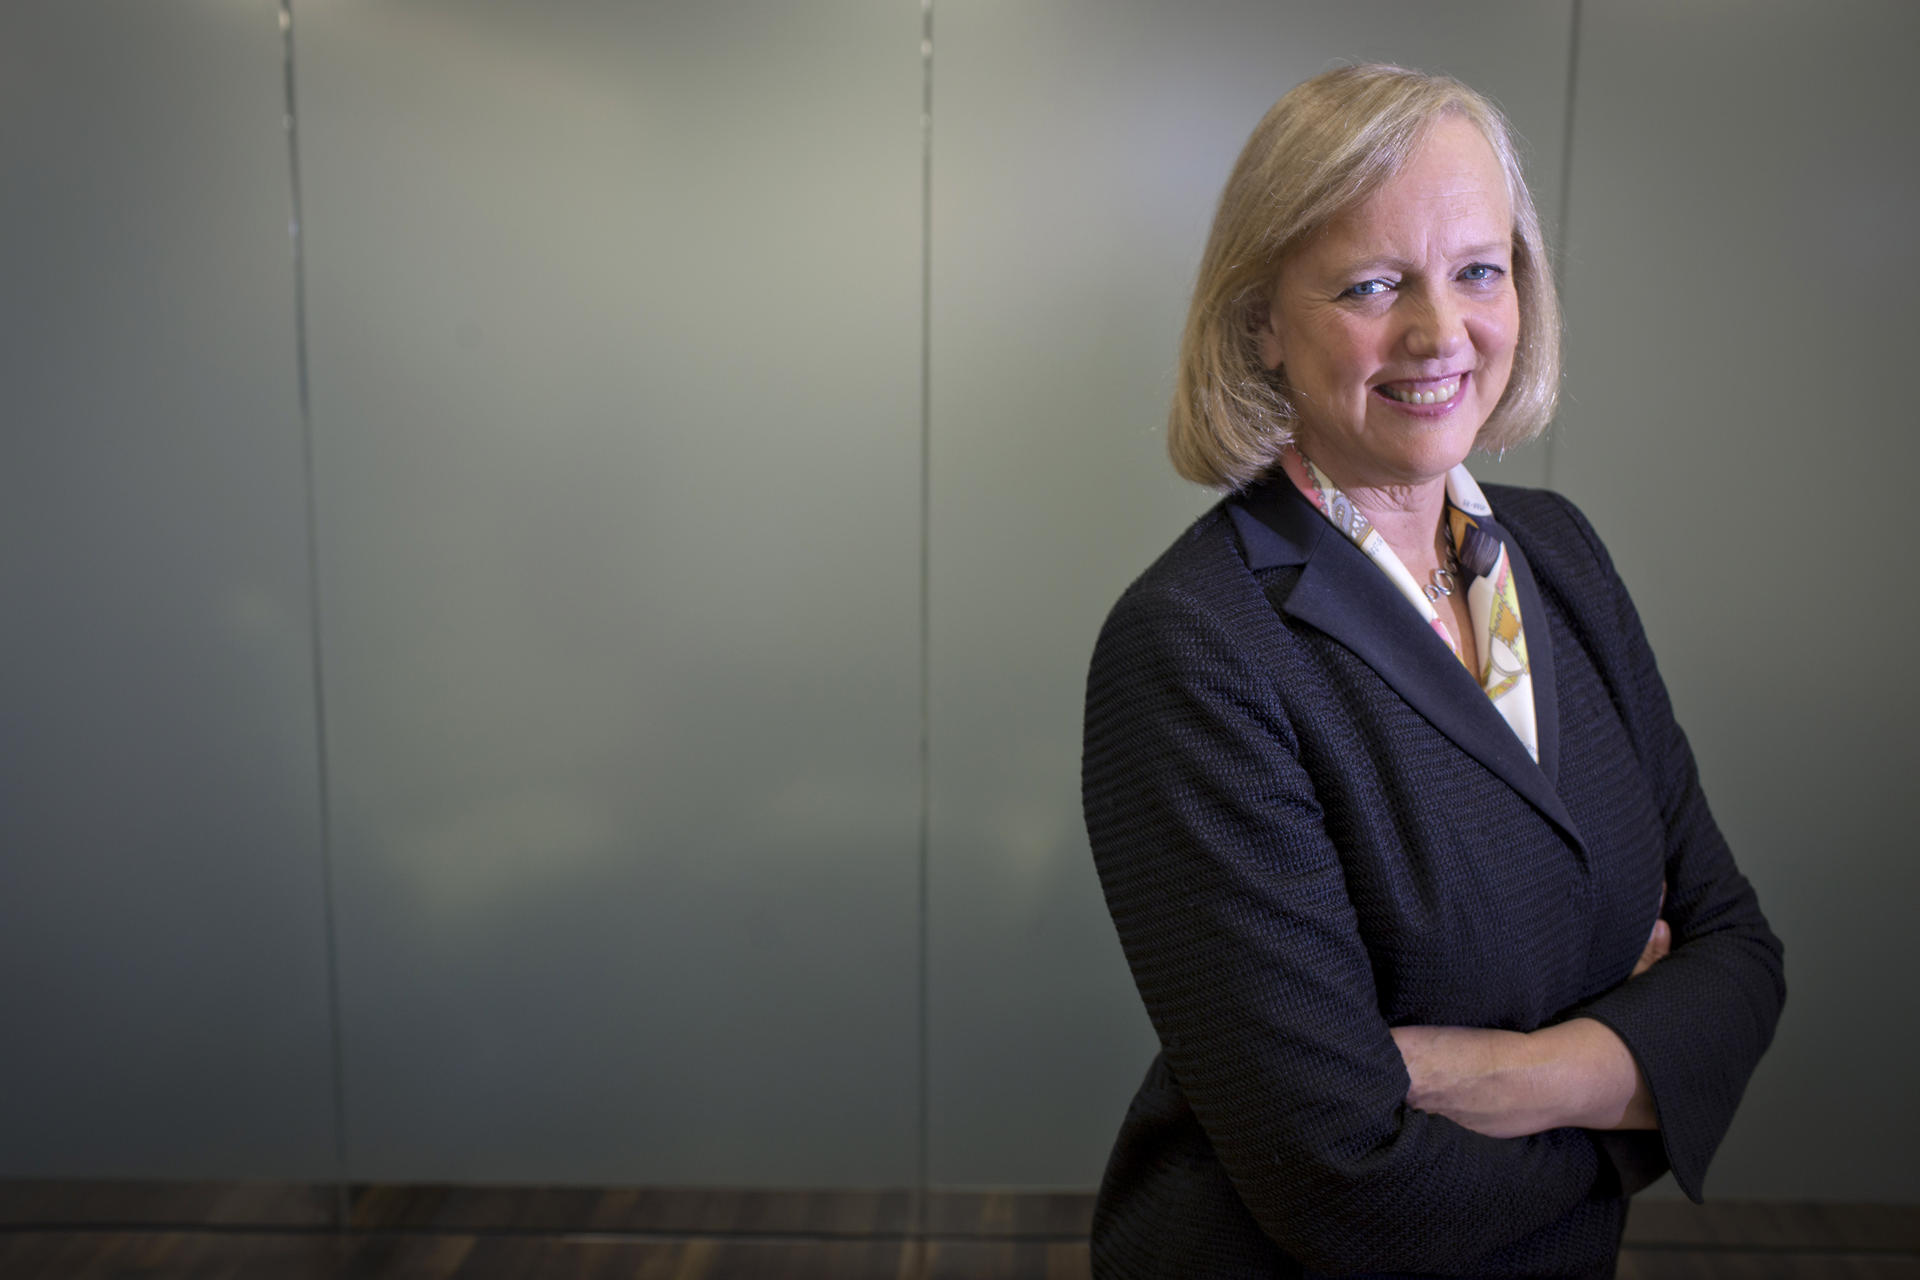 Meg Whitman has been introducing new products and cutting jobs to trim costs since she took over as chief executive in September 2011.